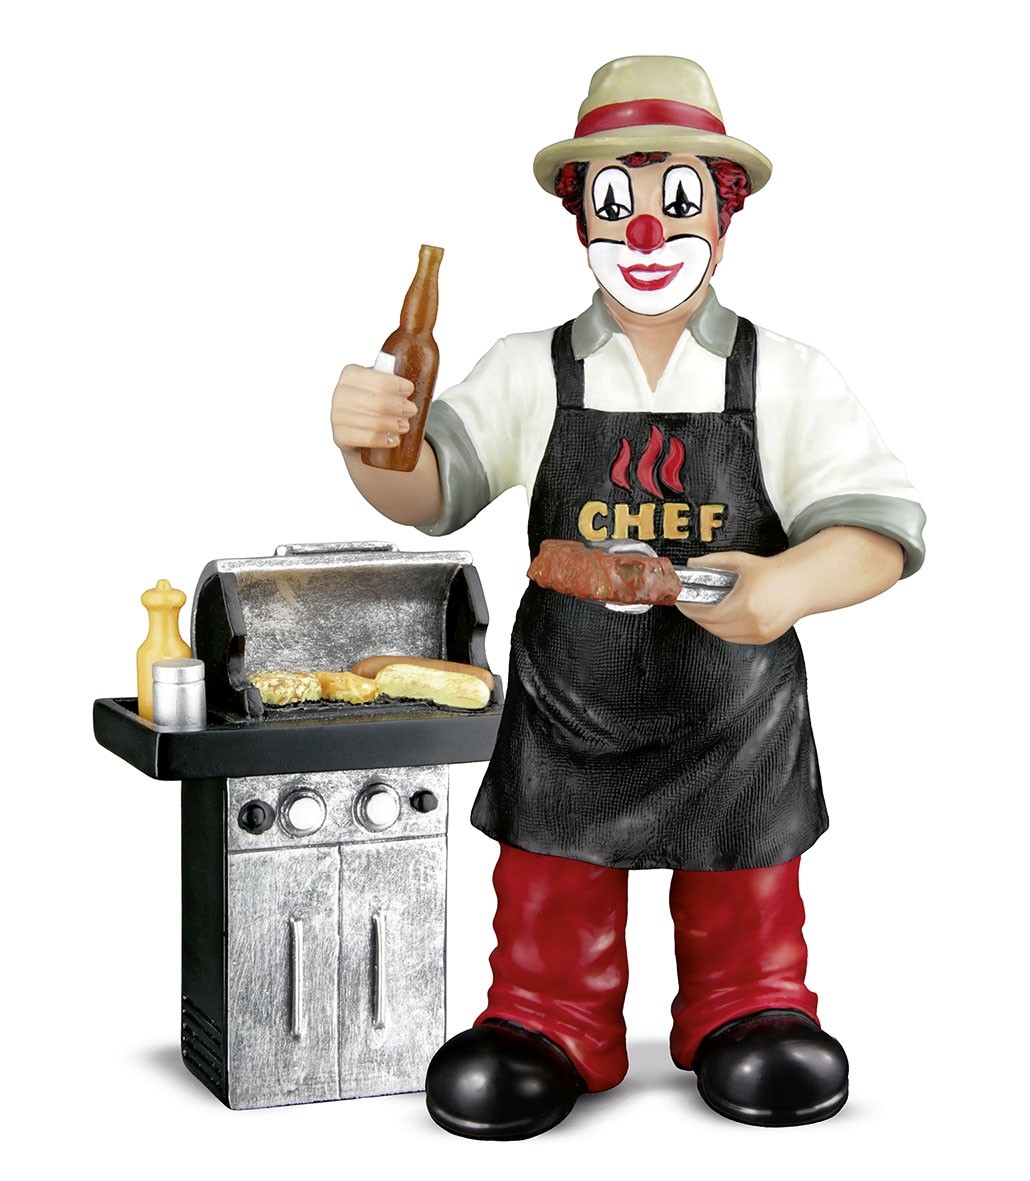 Chefgriller